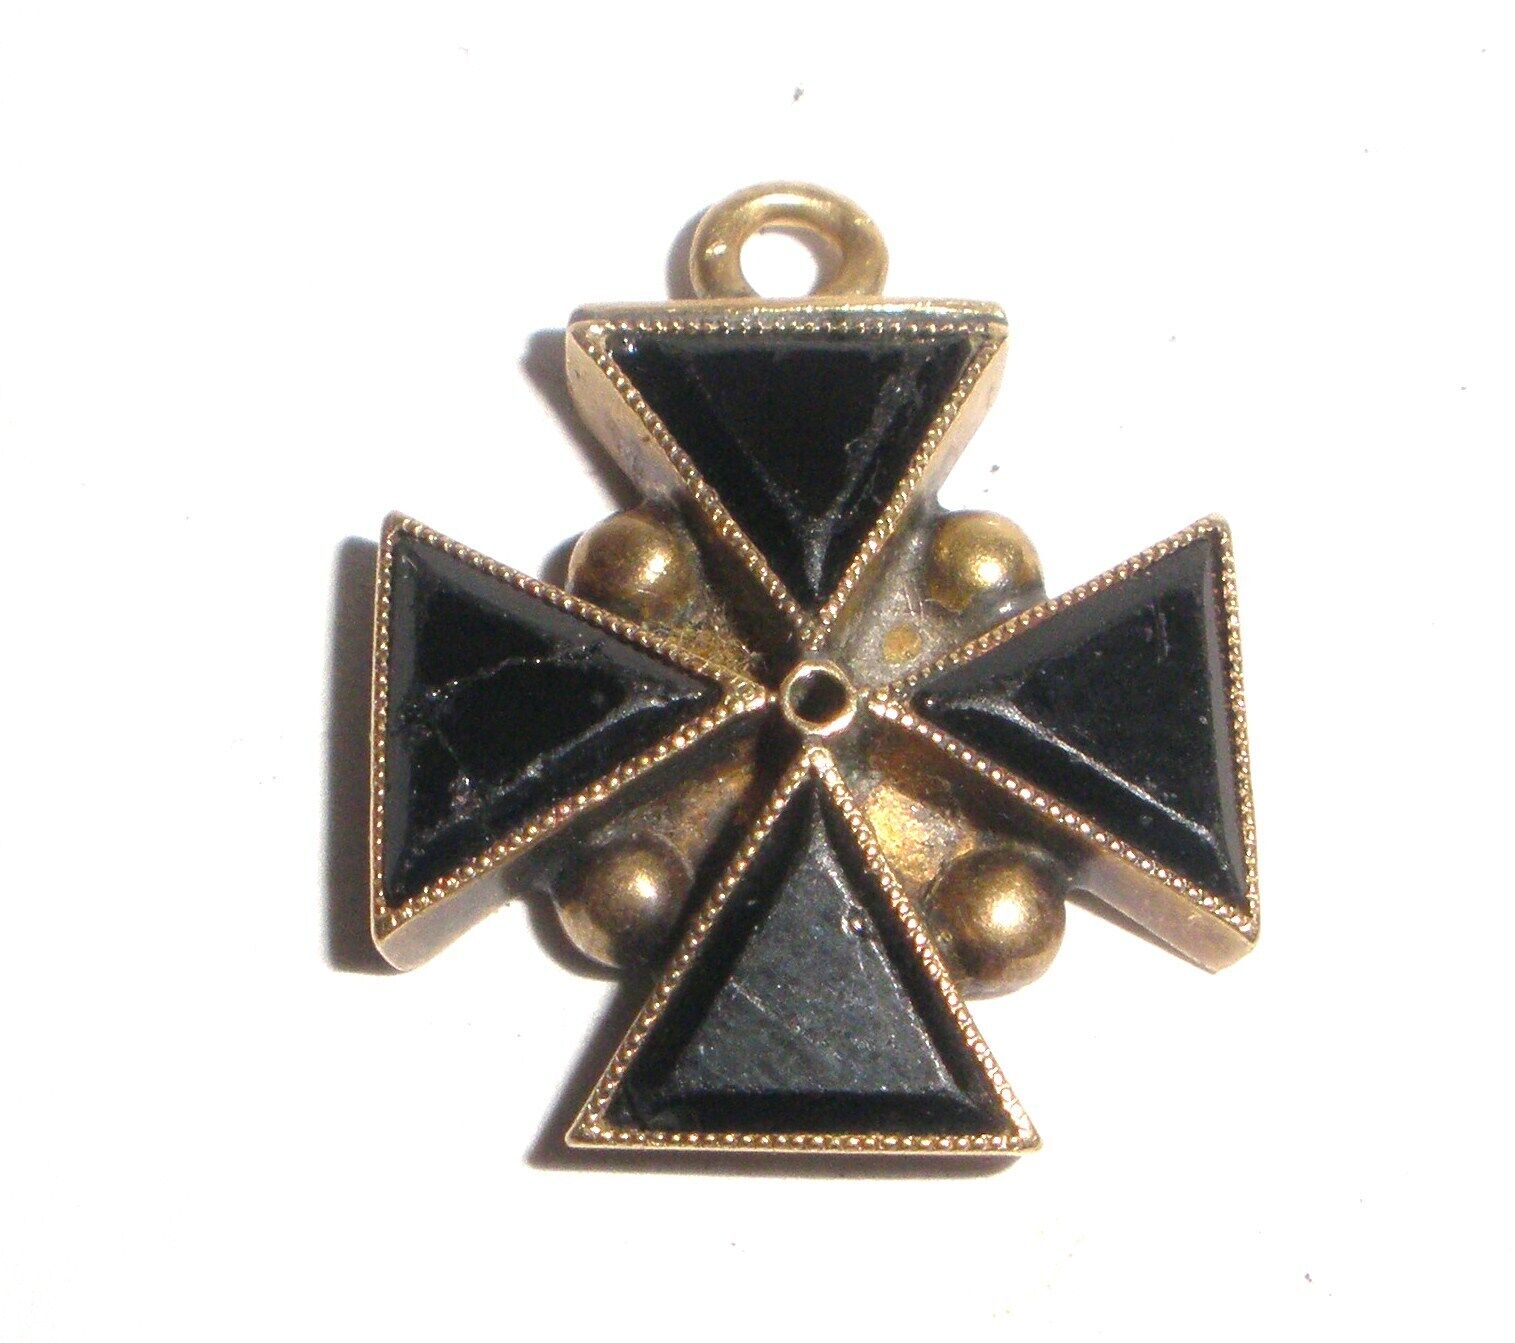  antique 14k small cross military ? medal  order